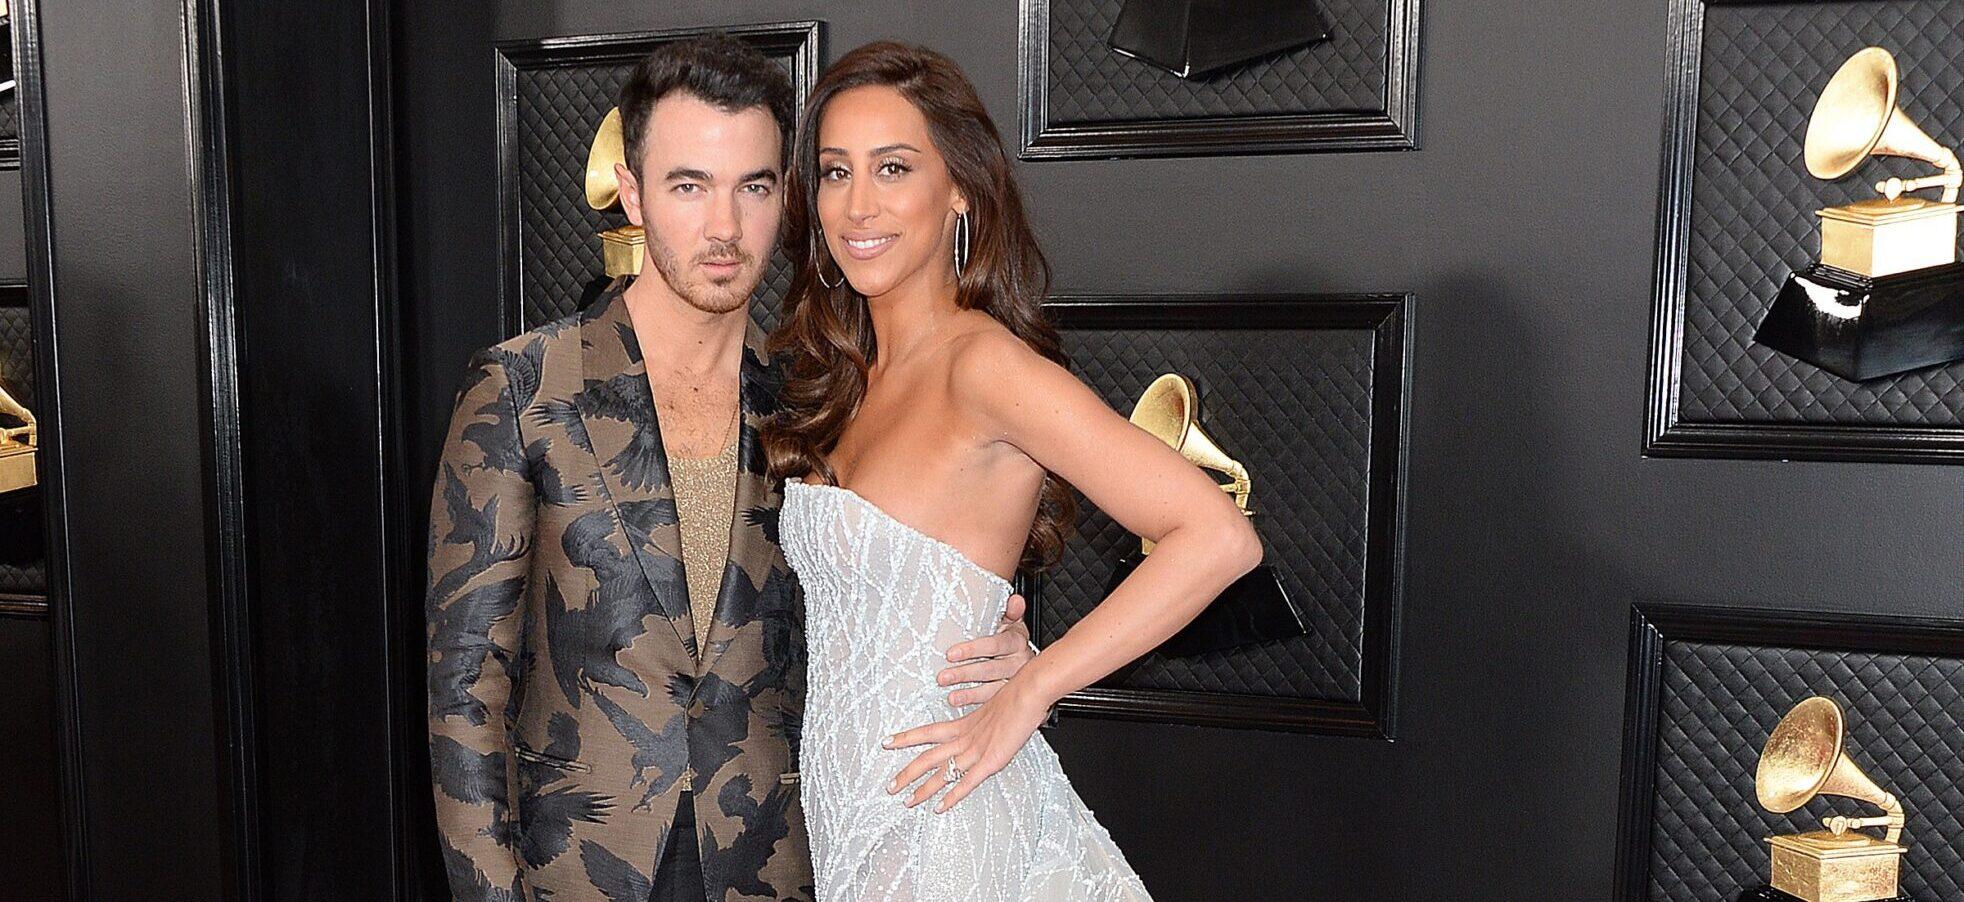 Kevin Jonas Wife’s Refers To Actress Sister-In-Laws As ‘Other Girls’, Feels Jealous